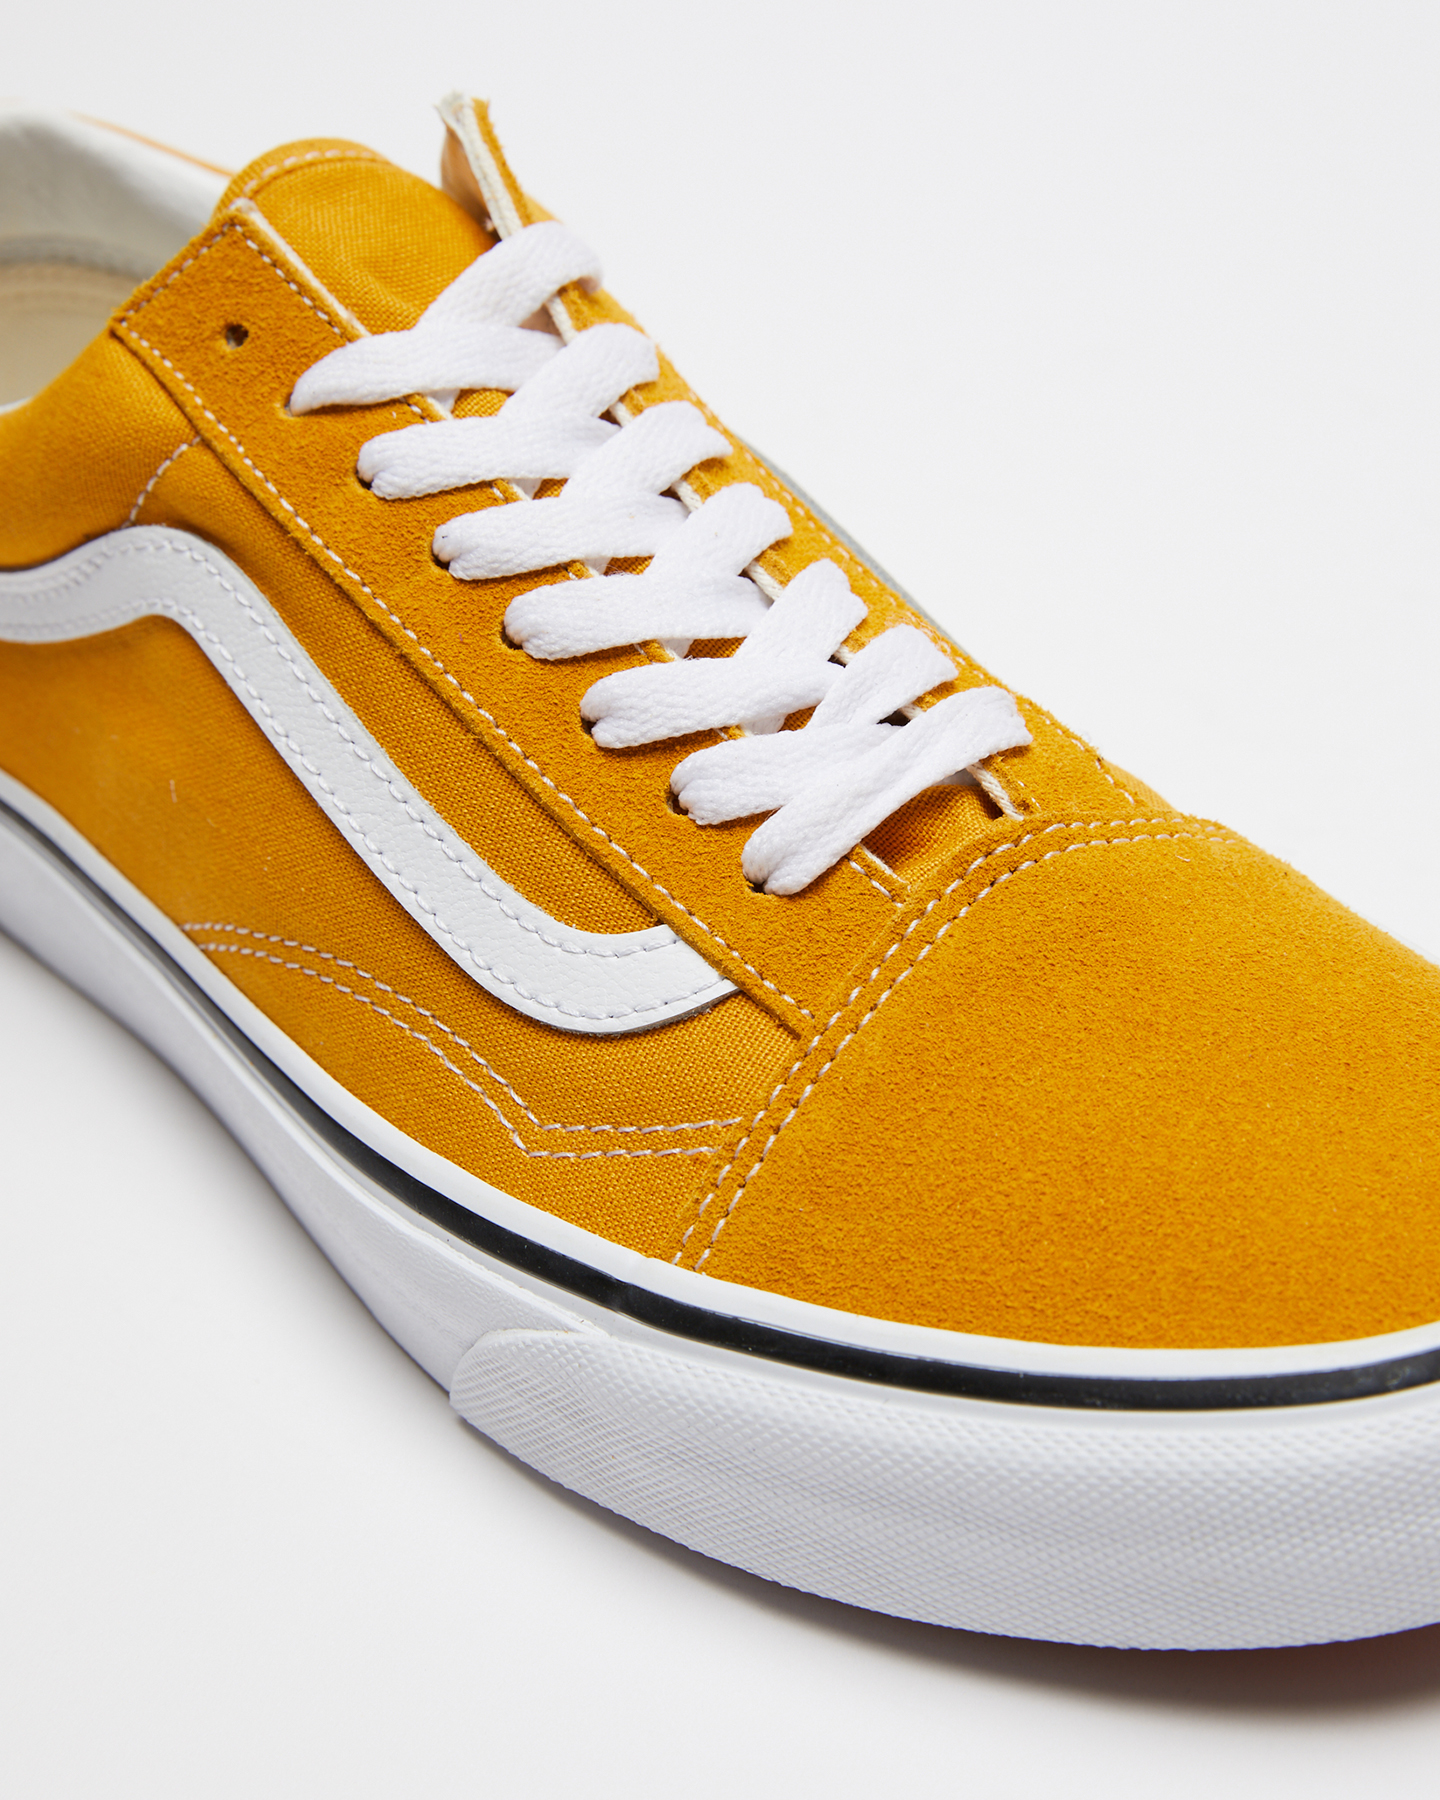 Lock Egoism unfathomable Vans Old Skool Color Theory Shoe - Golden Yellow | SurfStitch